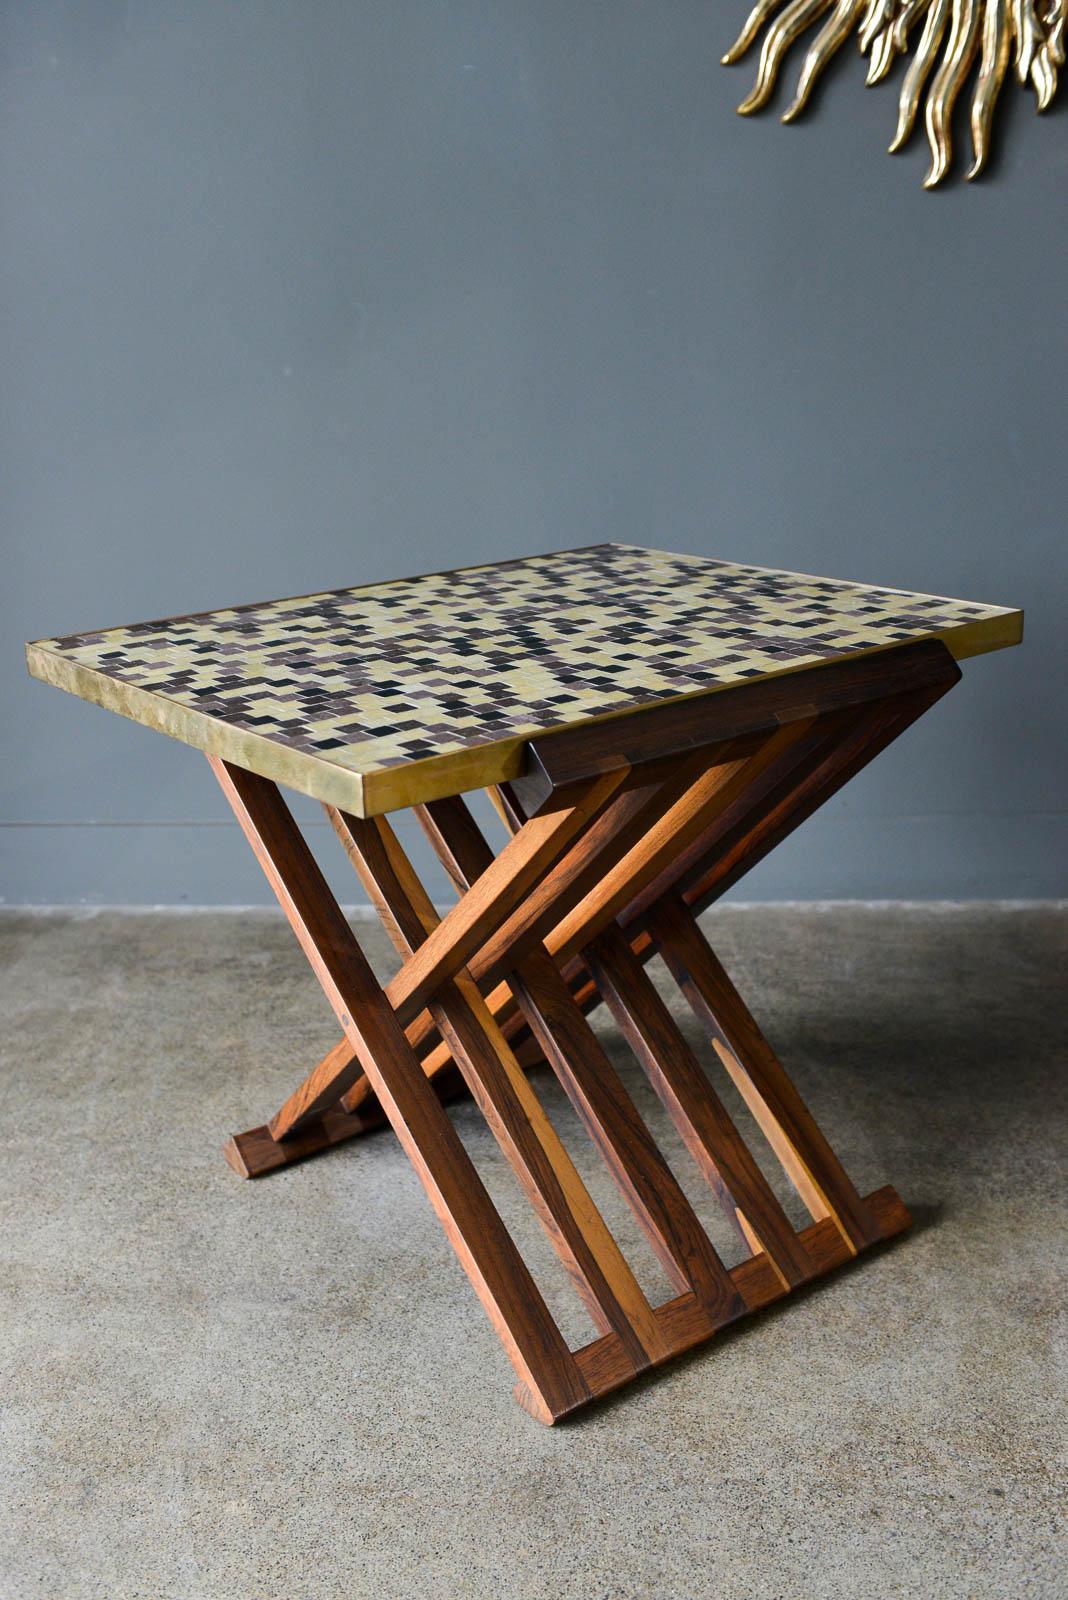 Folding tile top table by Edward Wormley for Dunbar, circa 1960. Table includes two authentic removable trays, one tile top with authentic Murano tiles and the other with an original white leather top. Solid rosewood folding base with brass accents.